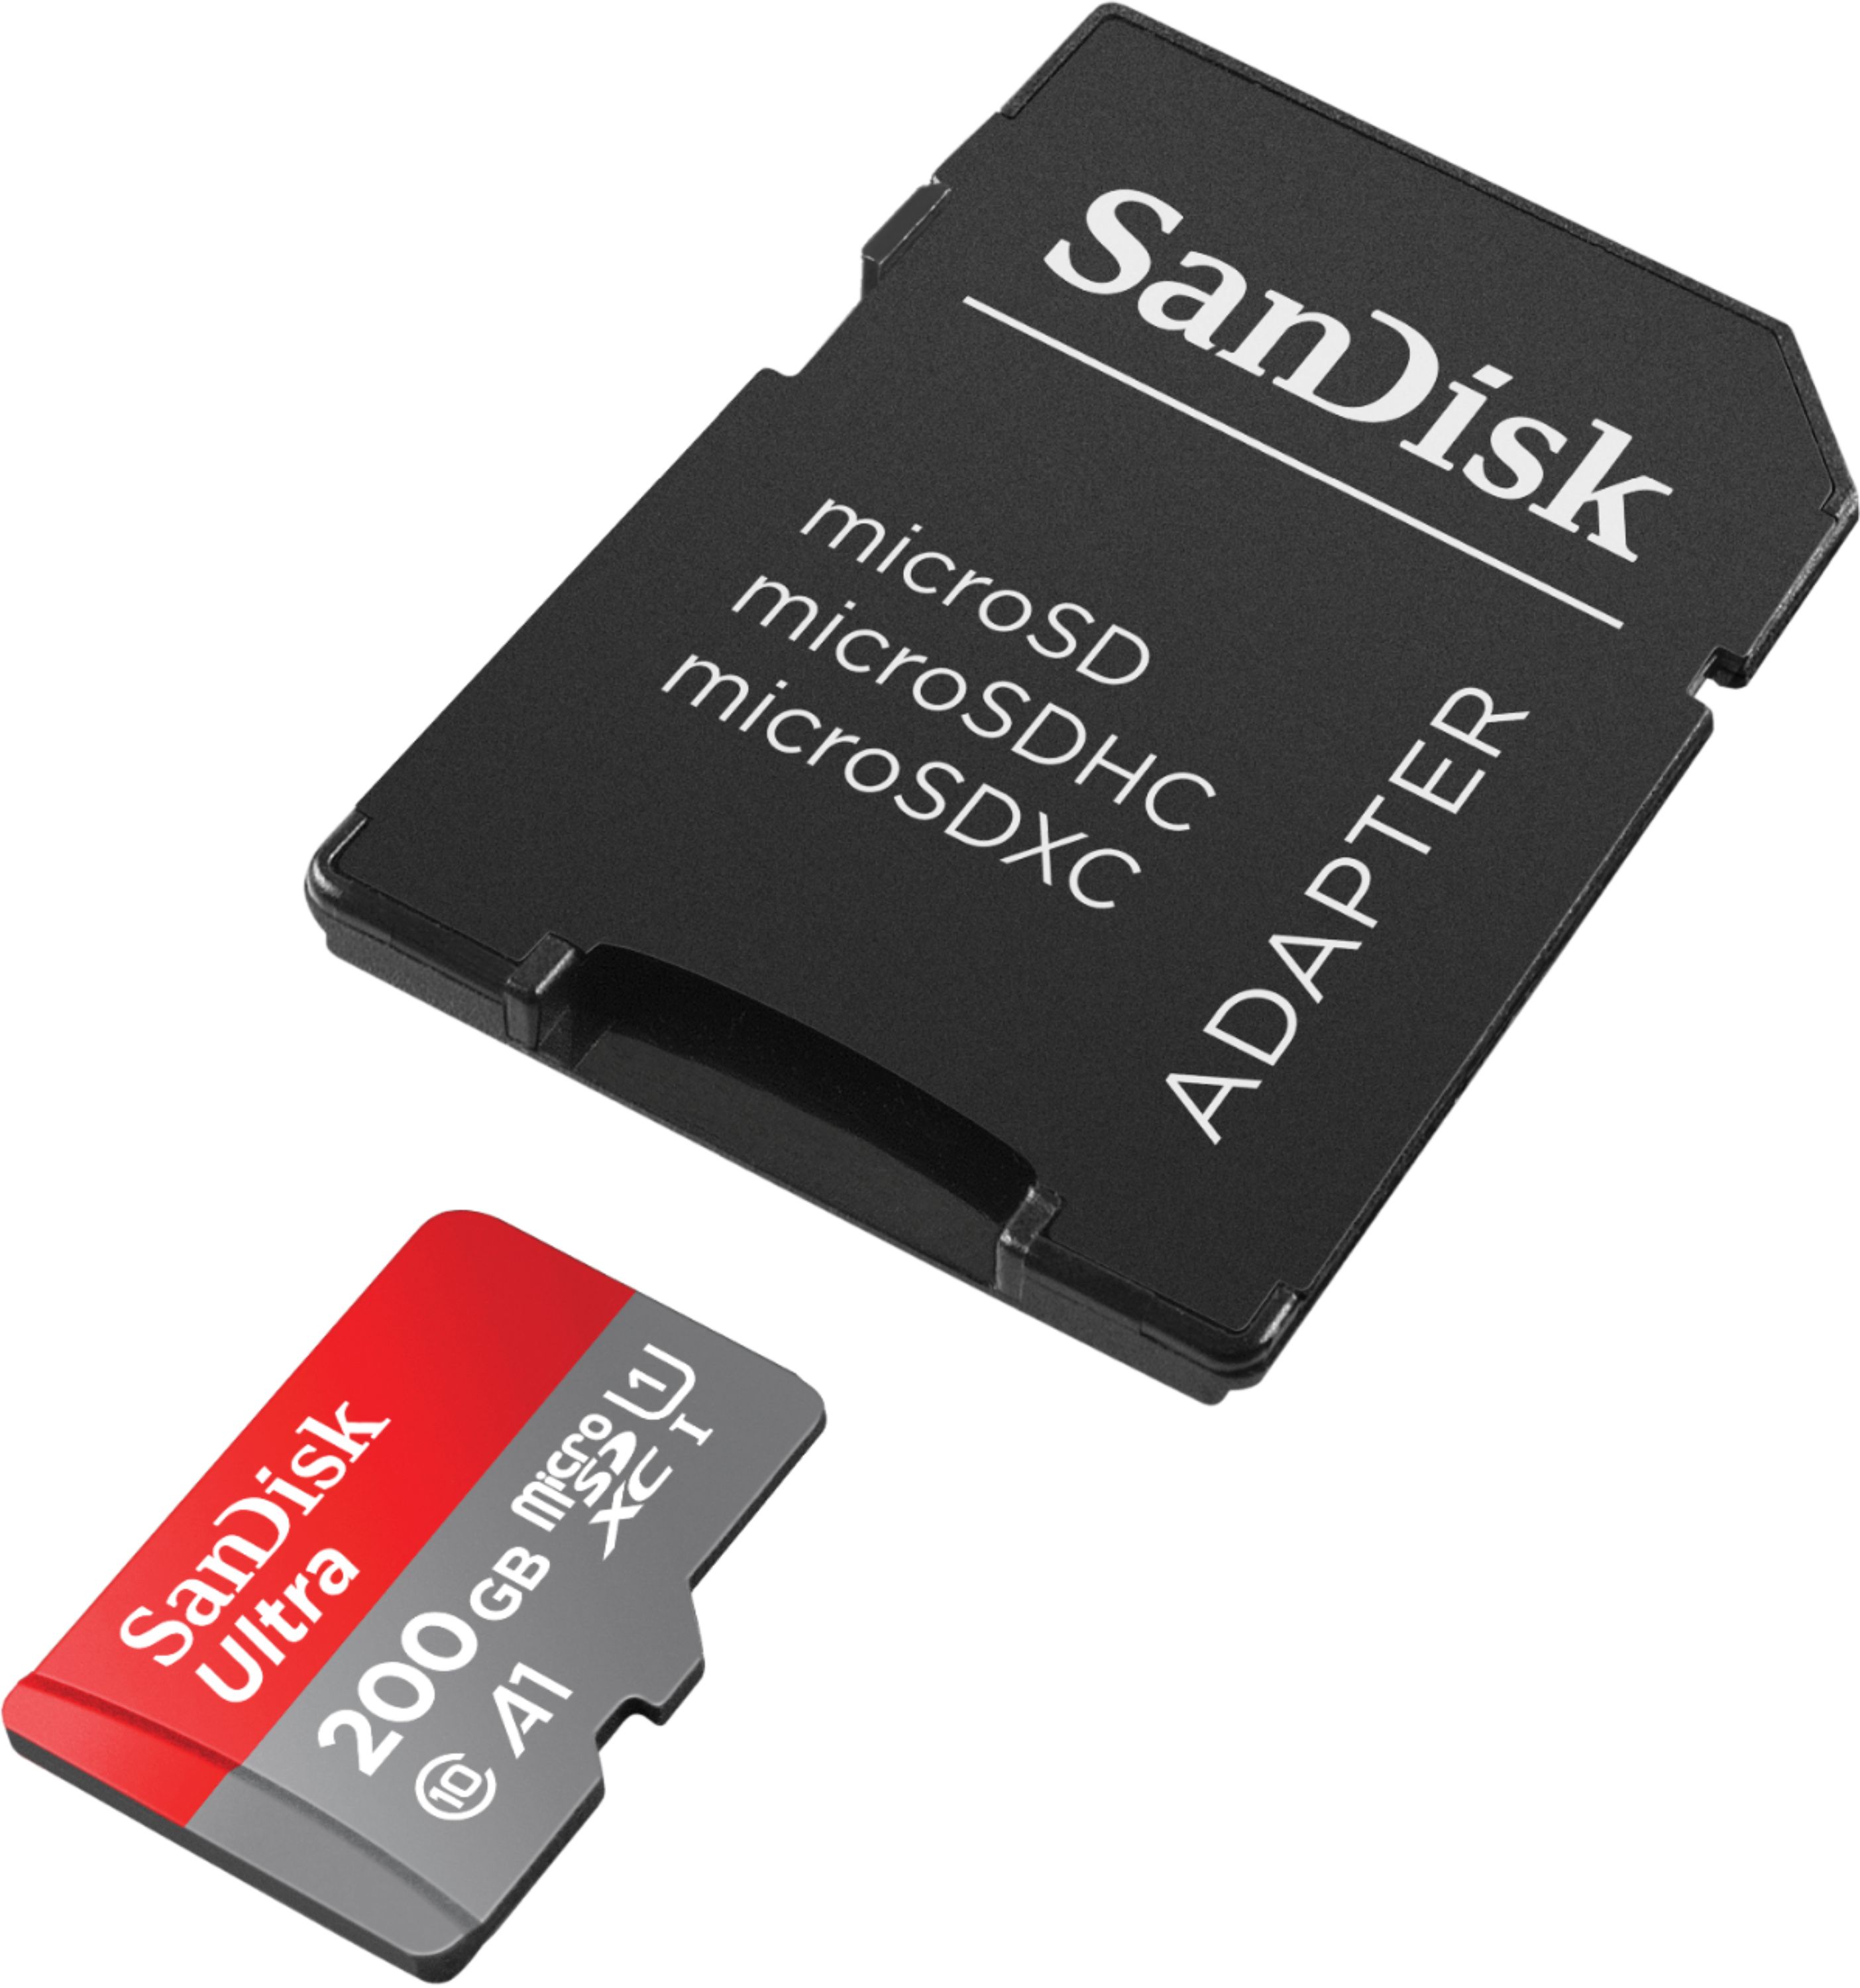 100MBs A1 U1 C10 Works with SanDisk SanDisk Ultra 200GB MicroSDXC Verified for LG H700 by SanFlash